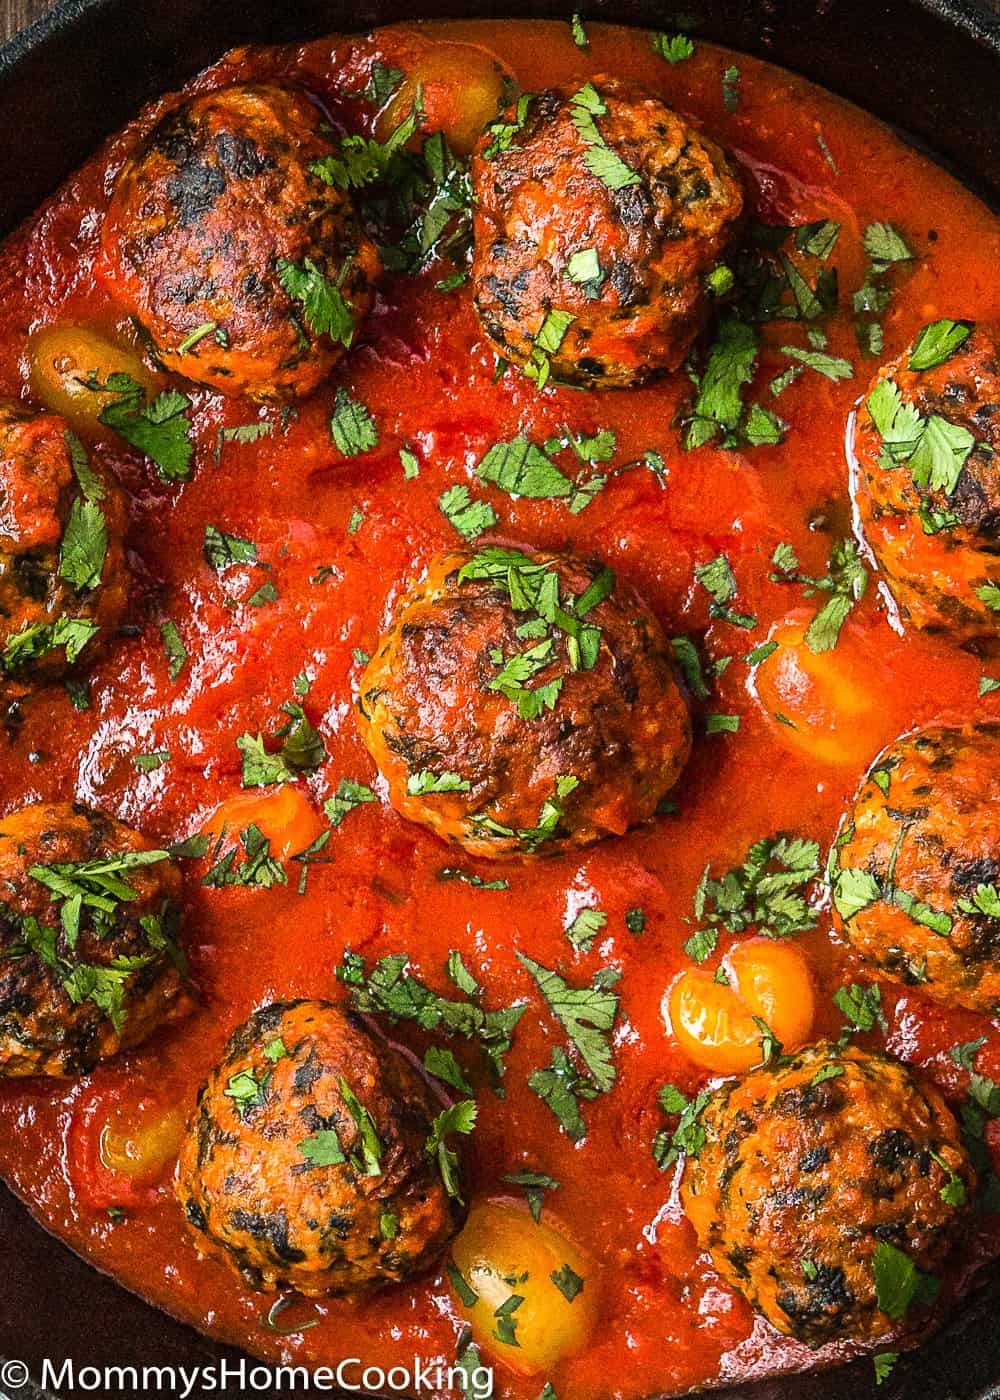 Eggless turkey meat balls in tomato sauce and herbs for garnish.